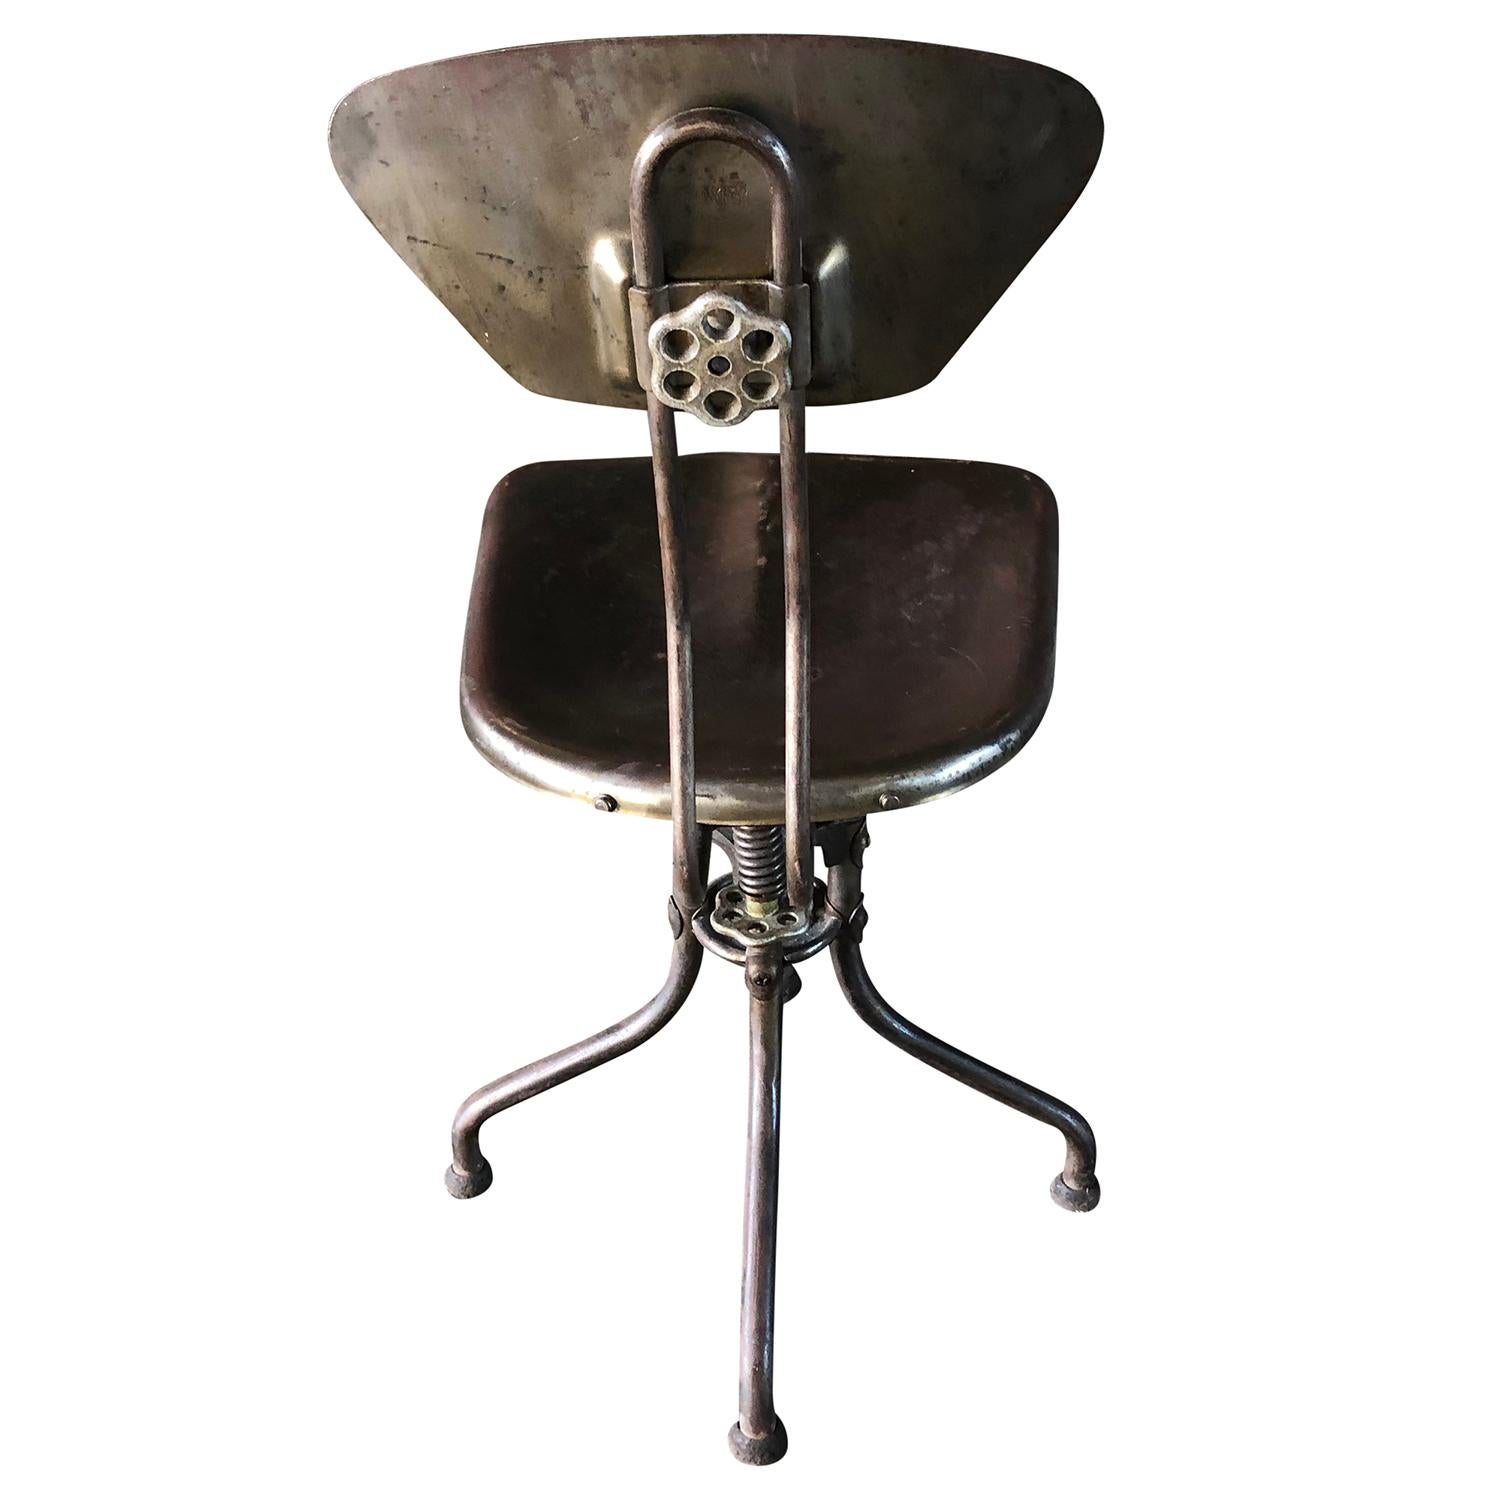 20th Century French Industrial Metal Chair - Vintage Work Chair  by Henri Lieber In Good Condition For Sale In West Palm Beach, FL